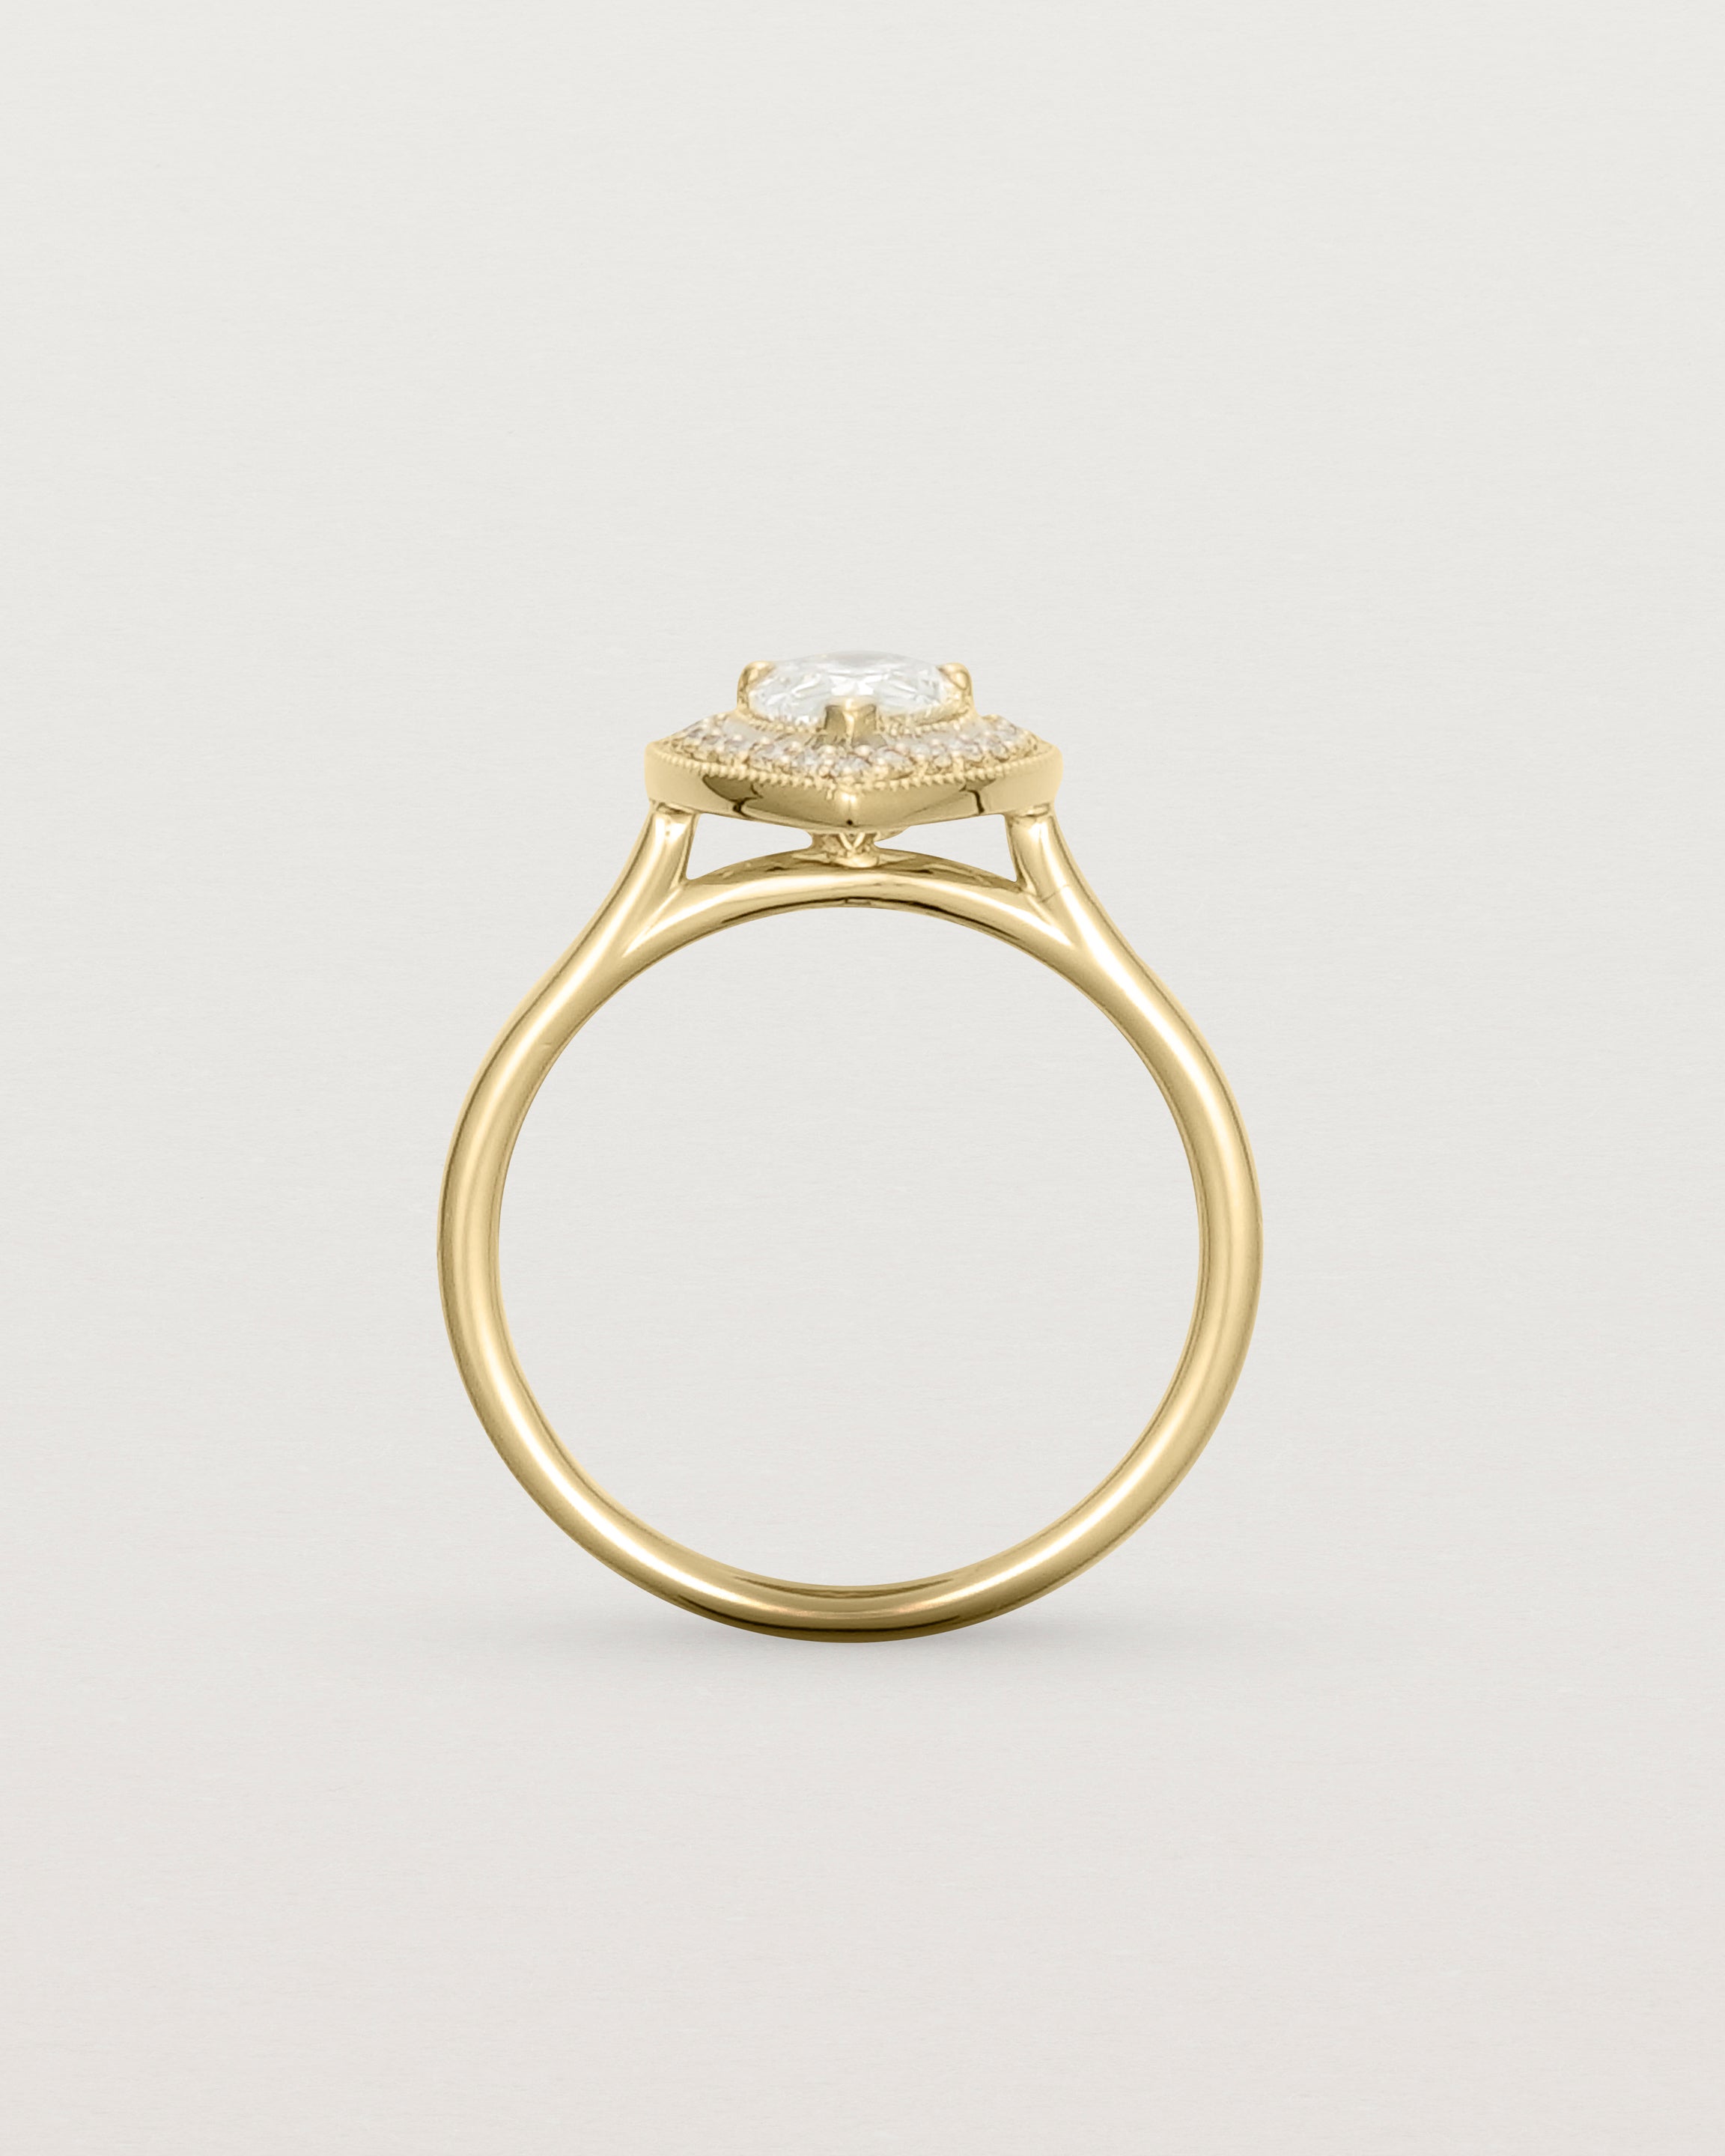 Standing view pear halo ring featuring a pear cut clear laboratory grown diamond and a halo of white diamonds in yellow gold